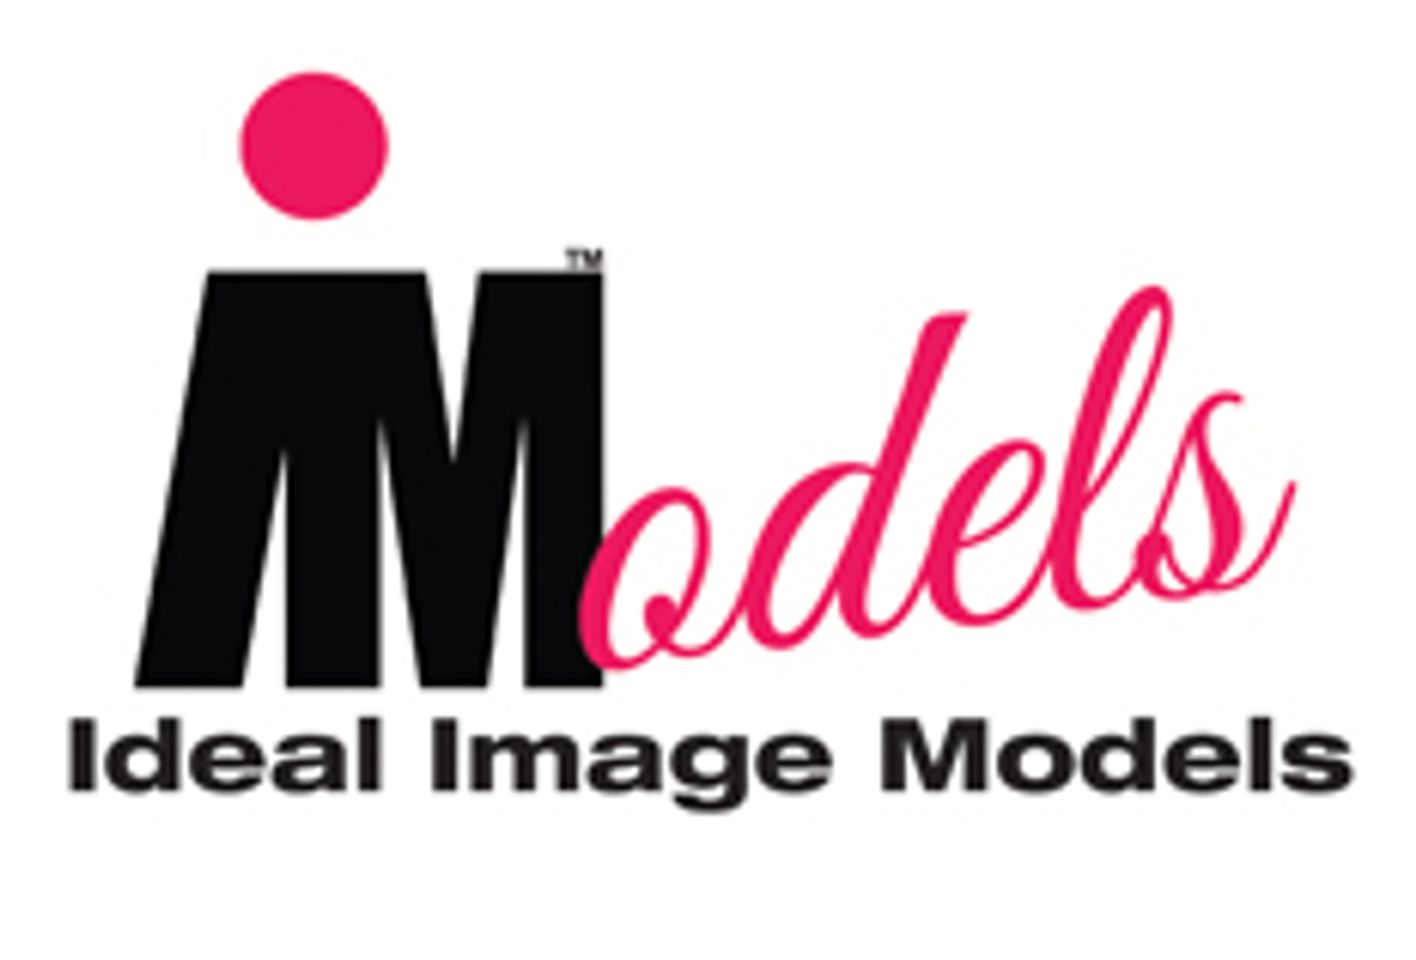 Ideal Image Models Receive Multiple Noms for Inaugural Sex Awards